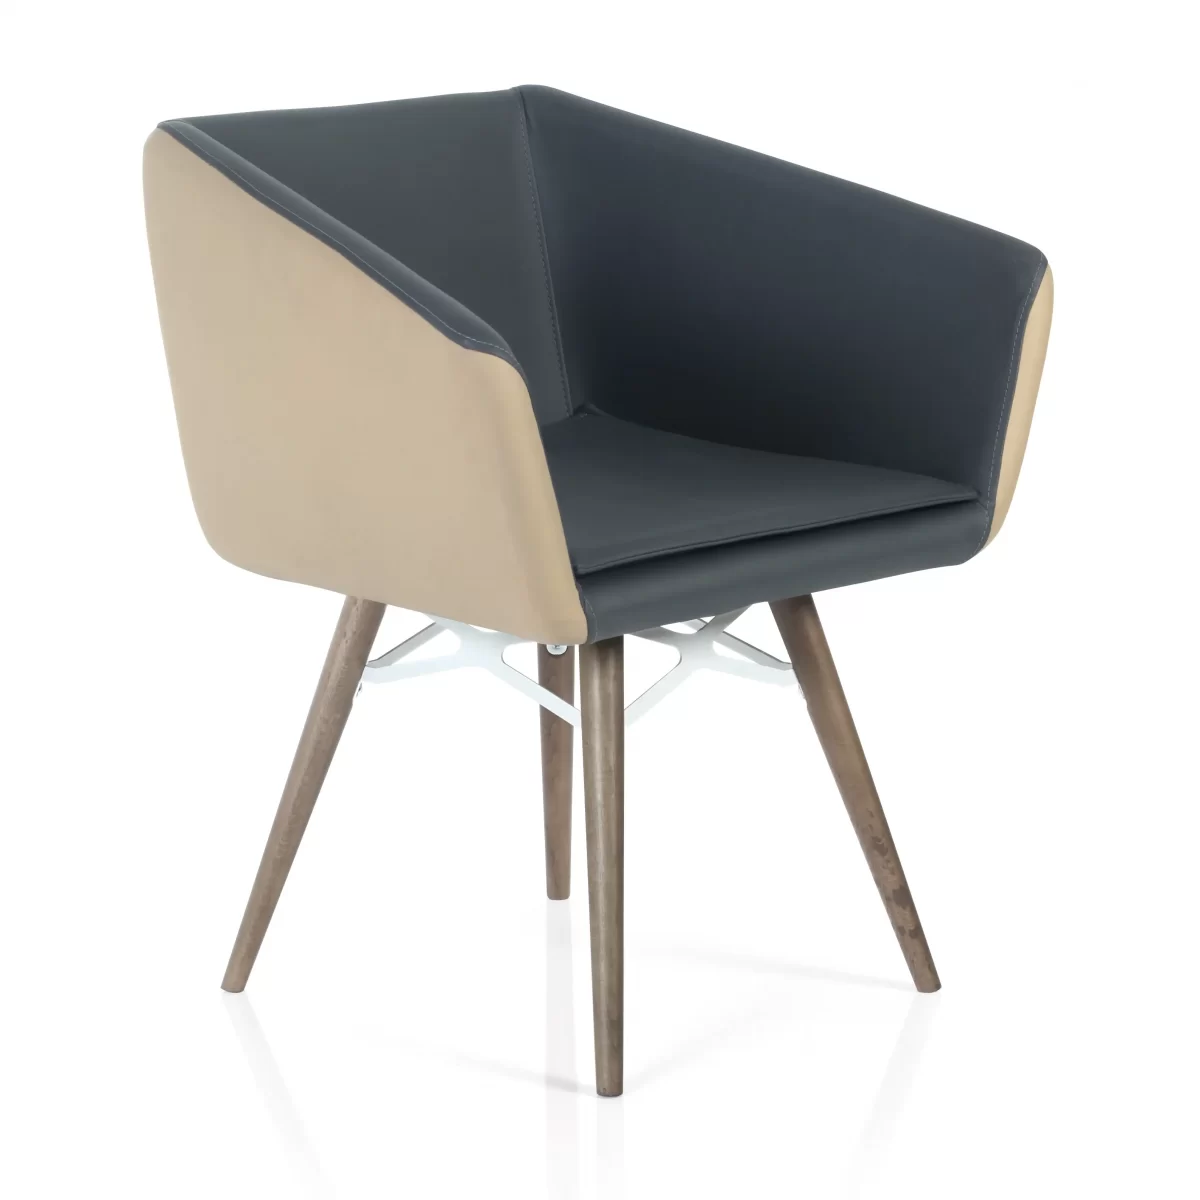 Nantes WD Office Cafe Chair scaled